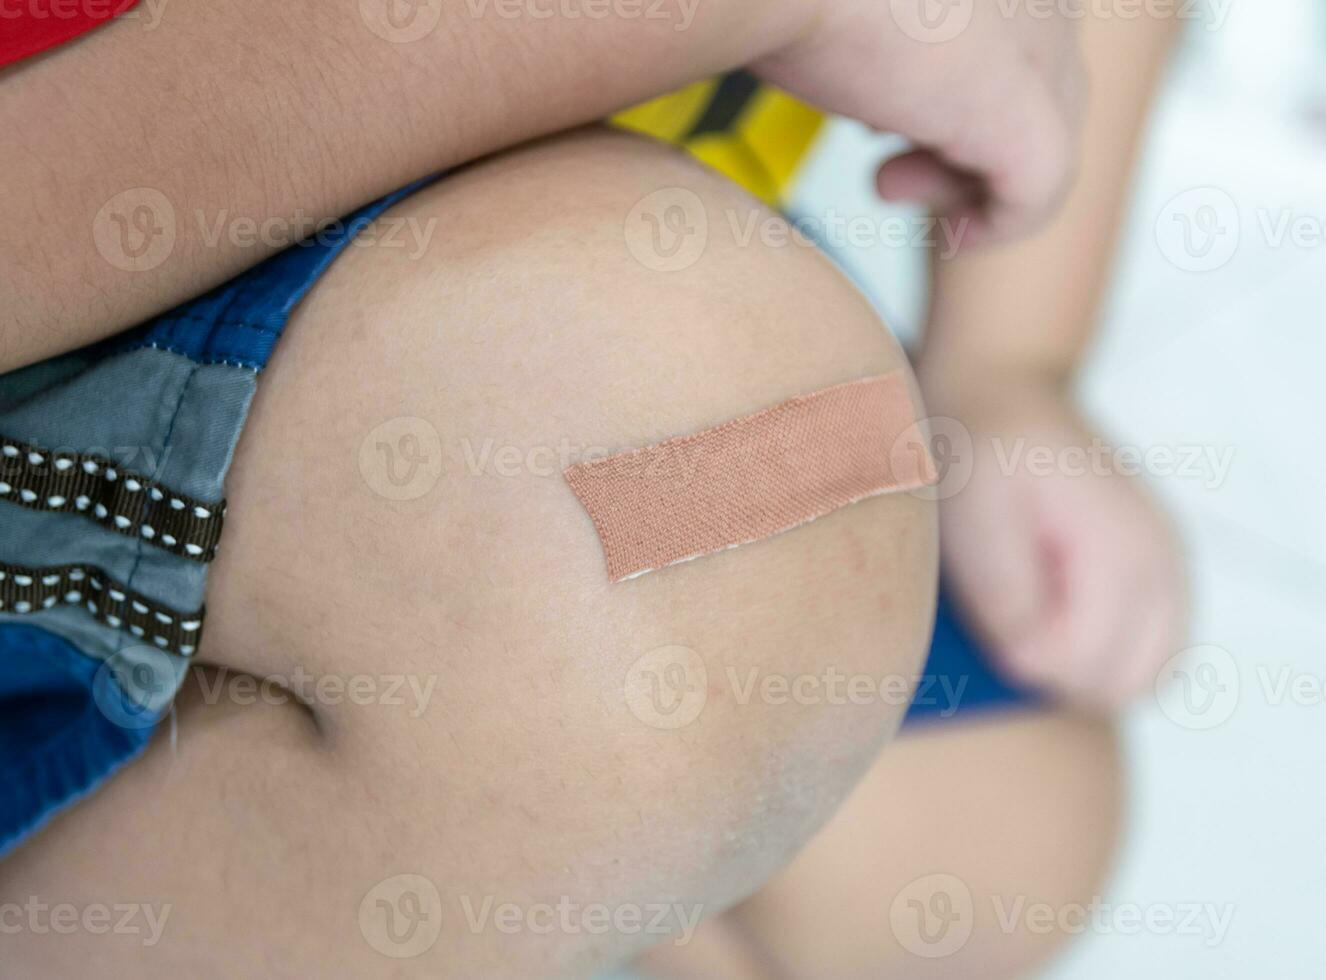 Plaster wound dressing on the child's leg photo